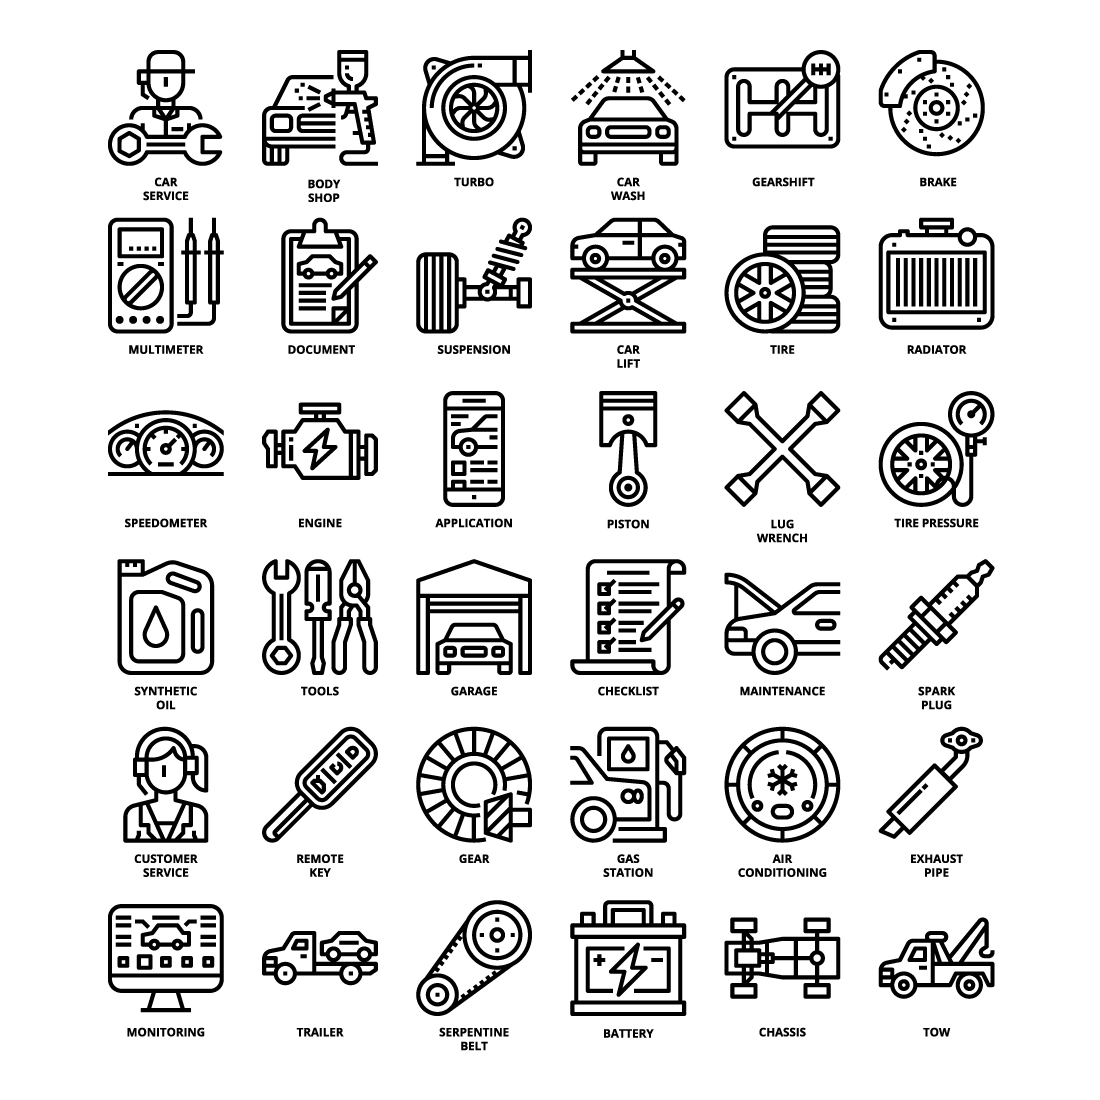 36 Car Service Icons Set x 4 Styles preview image.